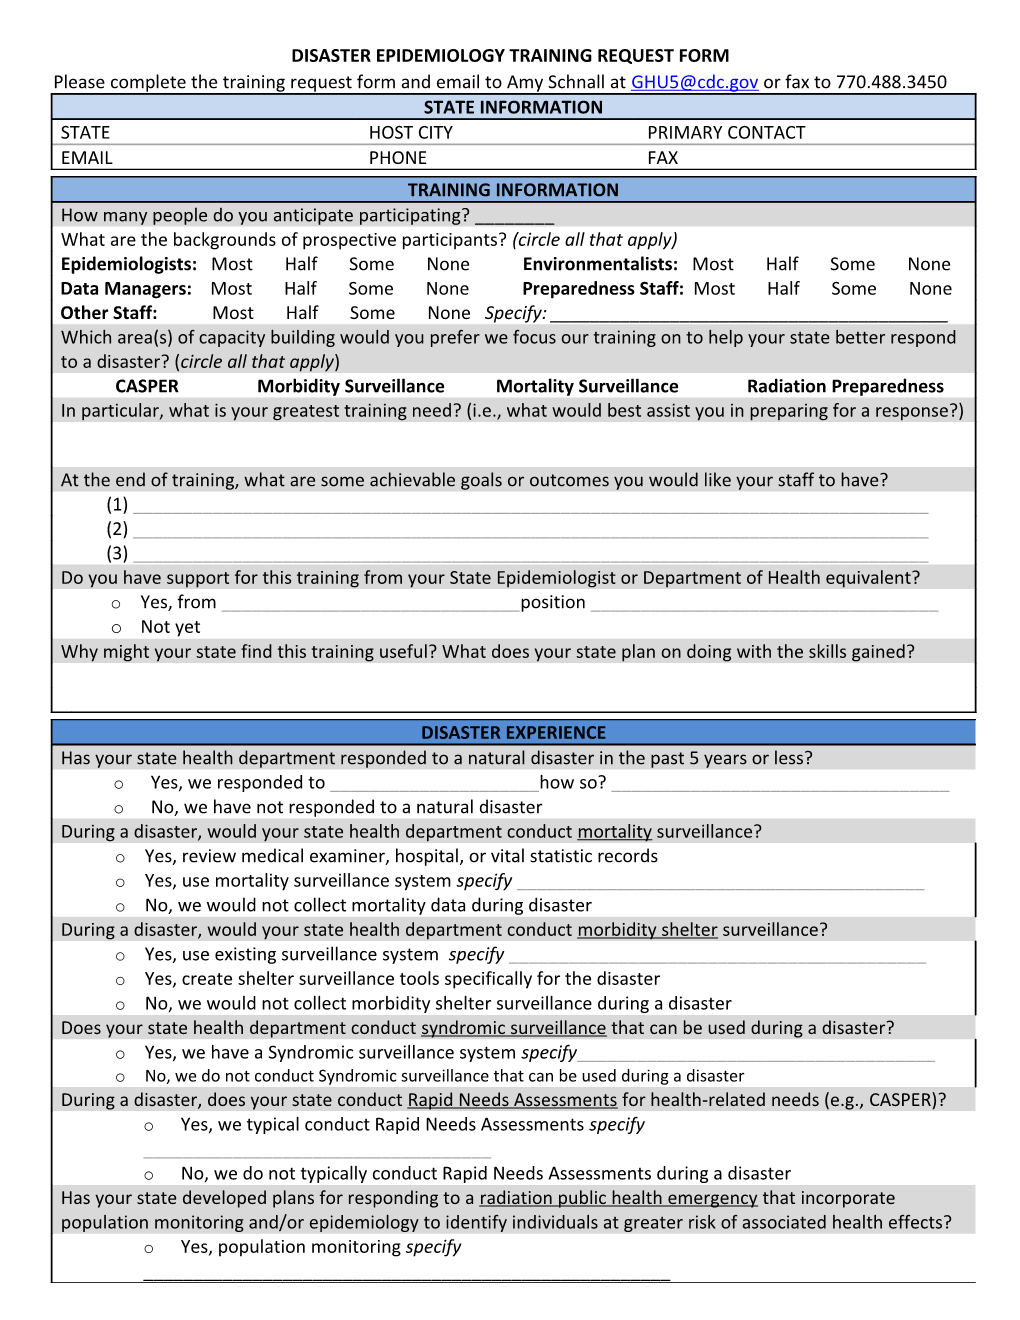 Disaster Epidemiology Training Request Form